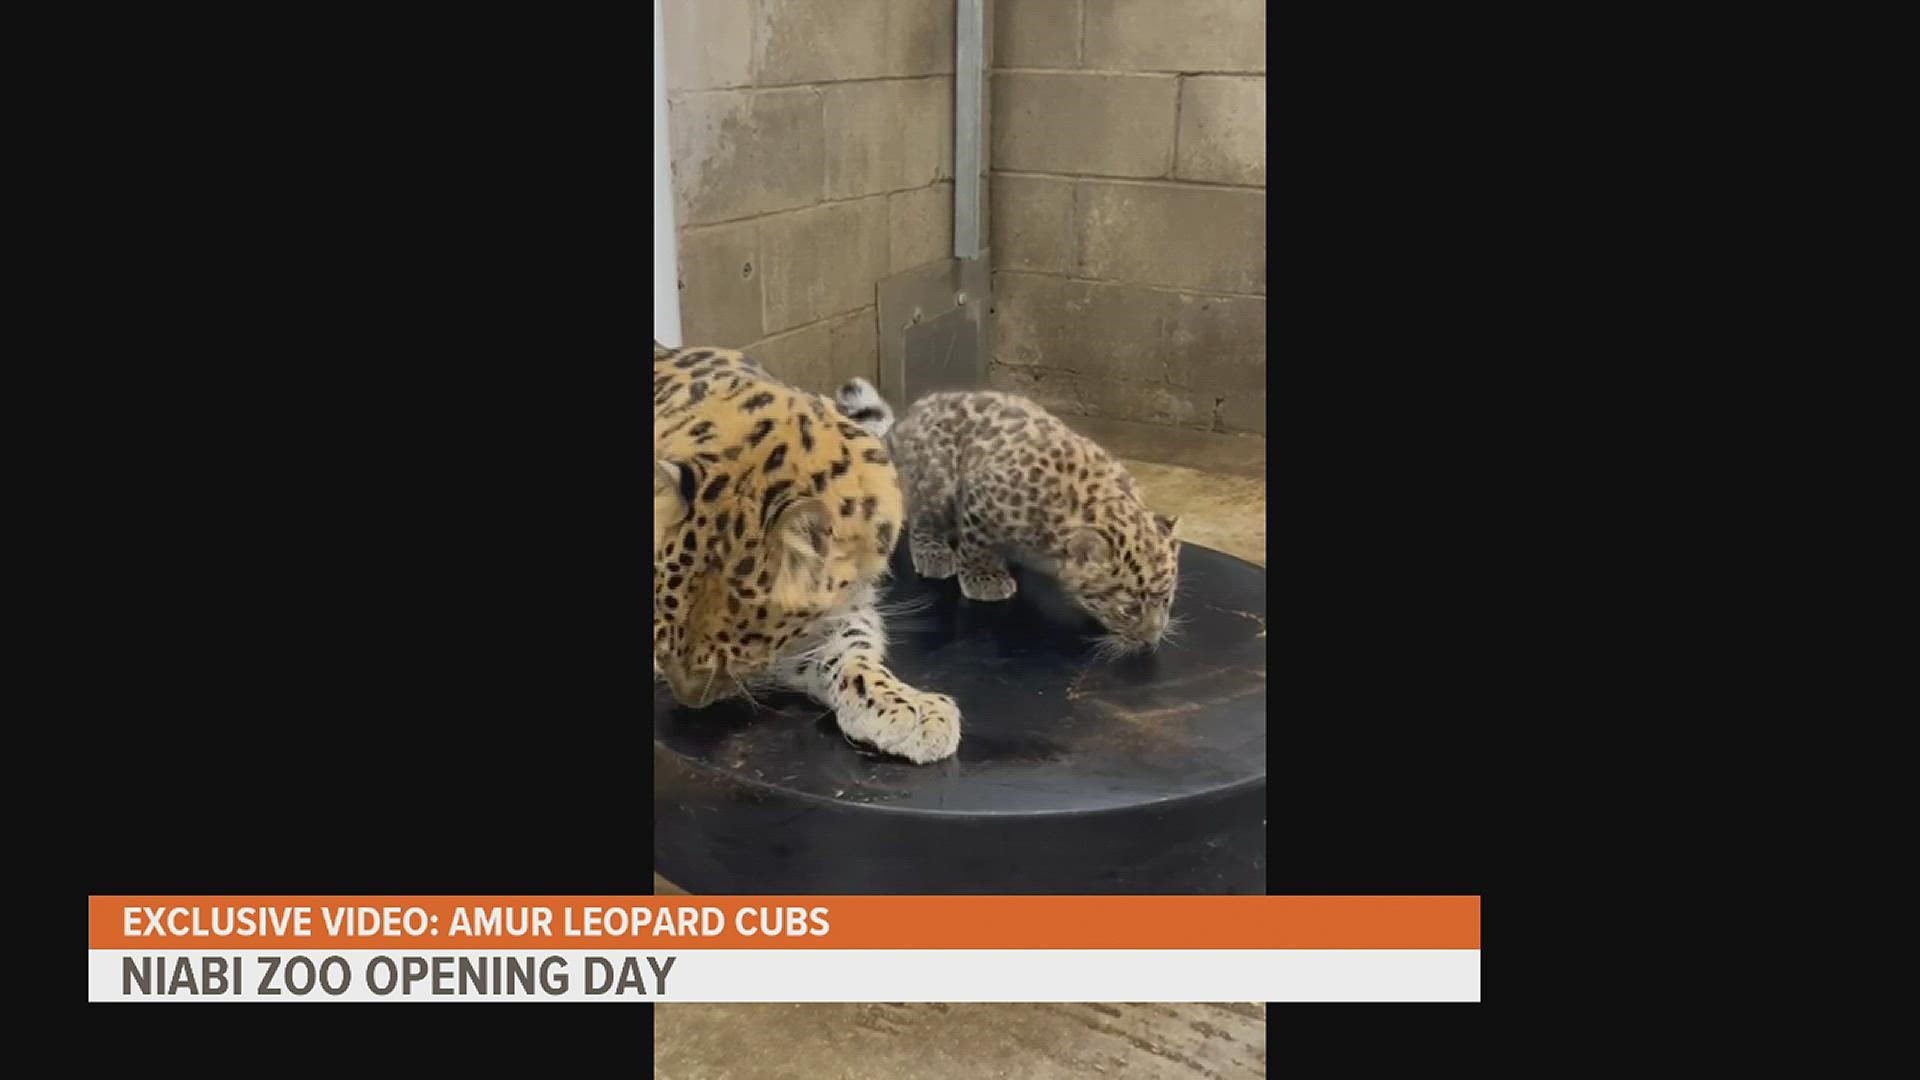 Niabi Zoo Assistant Director Tammy Schmidt appeared live on Good Morning Quad Cities to share update on the Amur Leopard Cubs and more